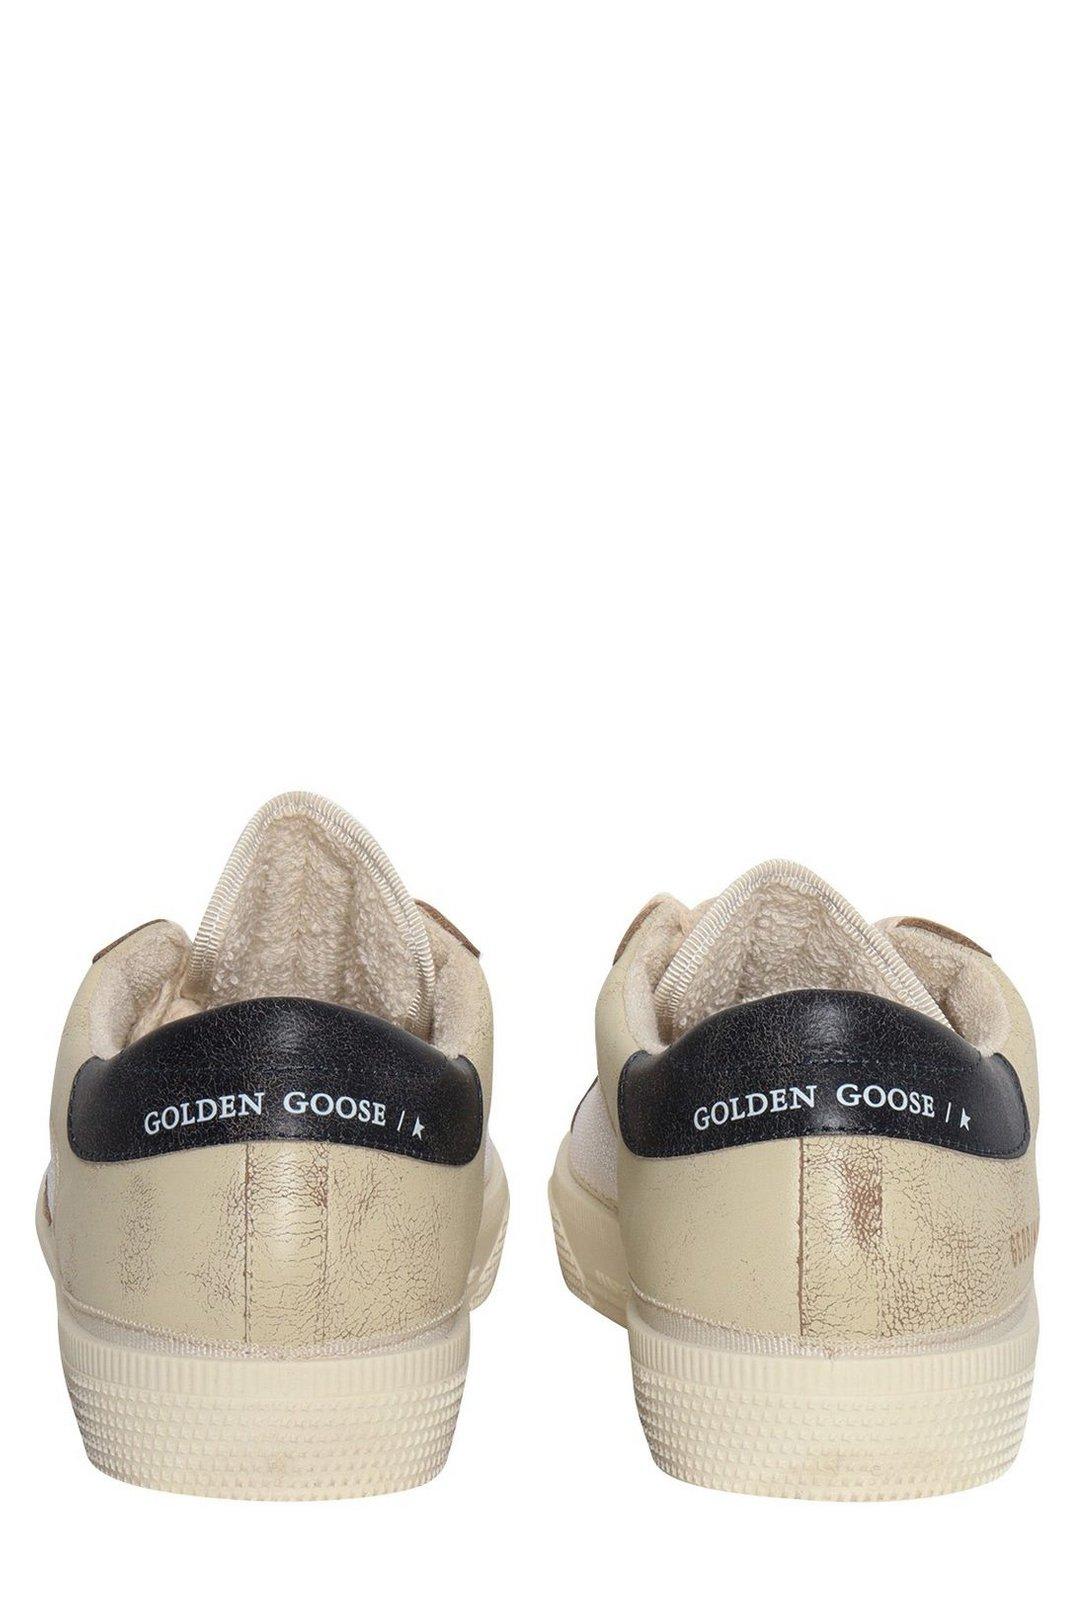 Shop Golden Goose Stardan Star Patch Distressed Sneakers